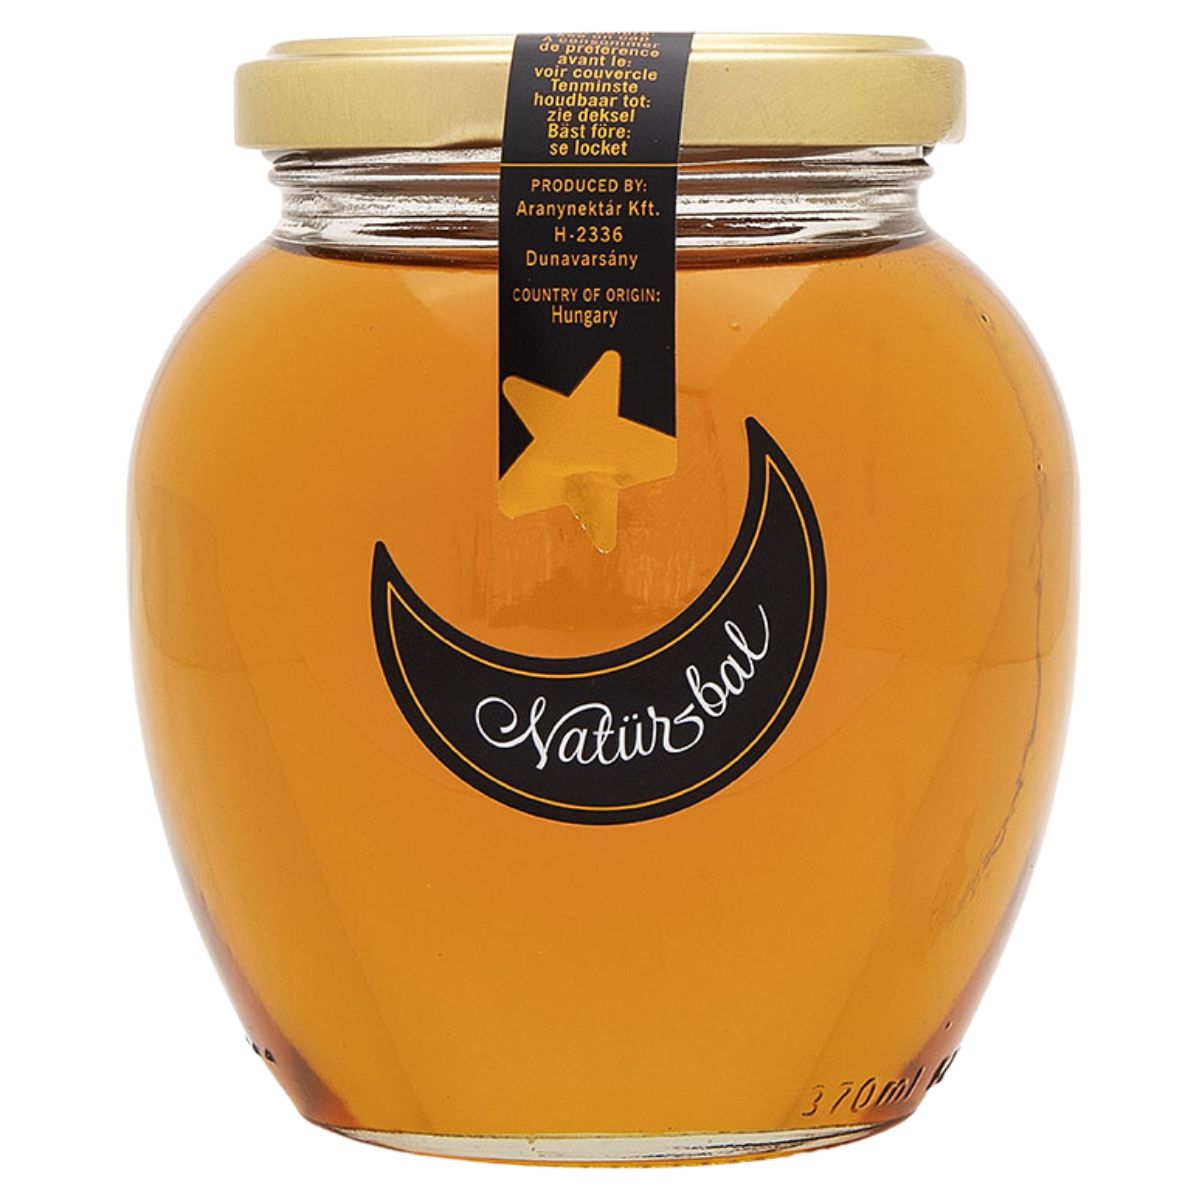 Naturbal - Syrup With Honey - 450g with a crescent moon and star label design.